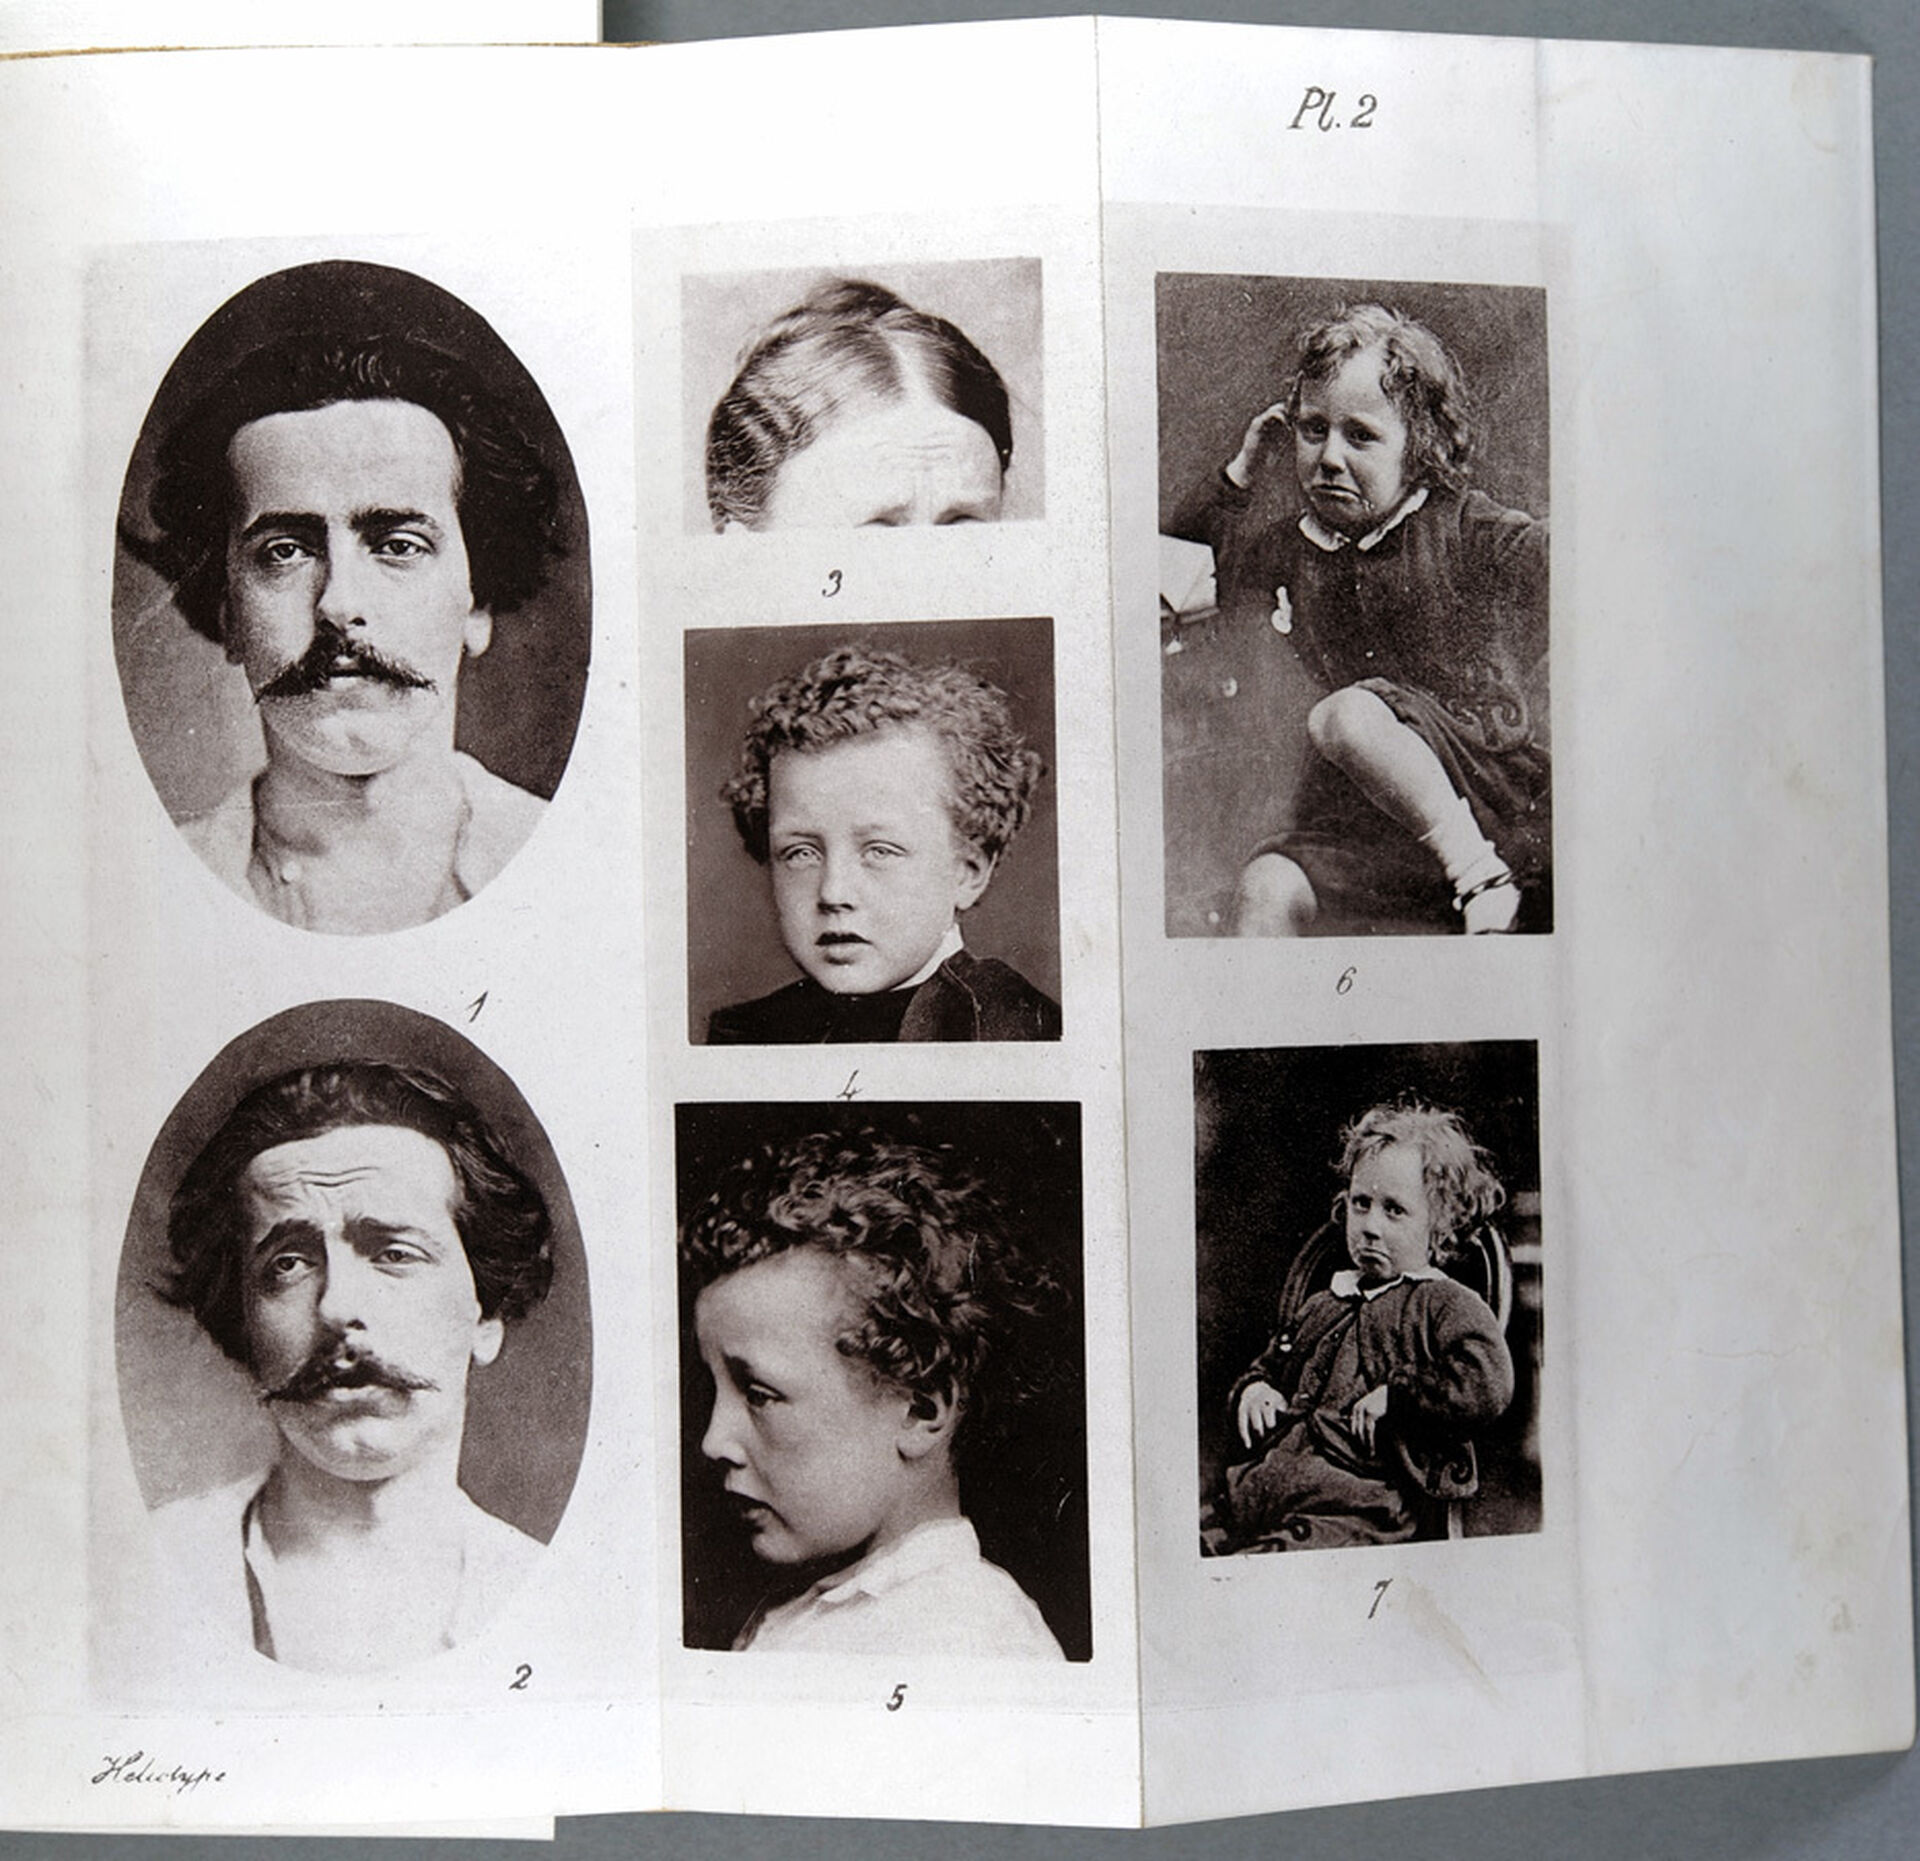 Pictures in Charles Dawrwin's book The Expression of the Emotions in Man and Animals, showing "Sorrow".